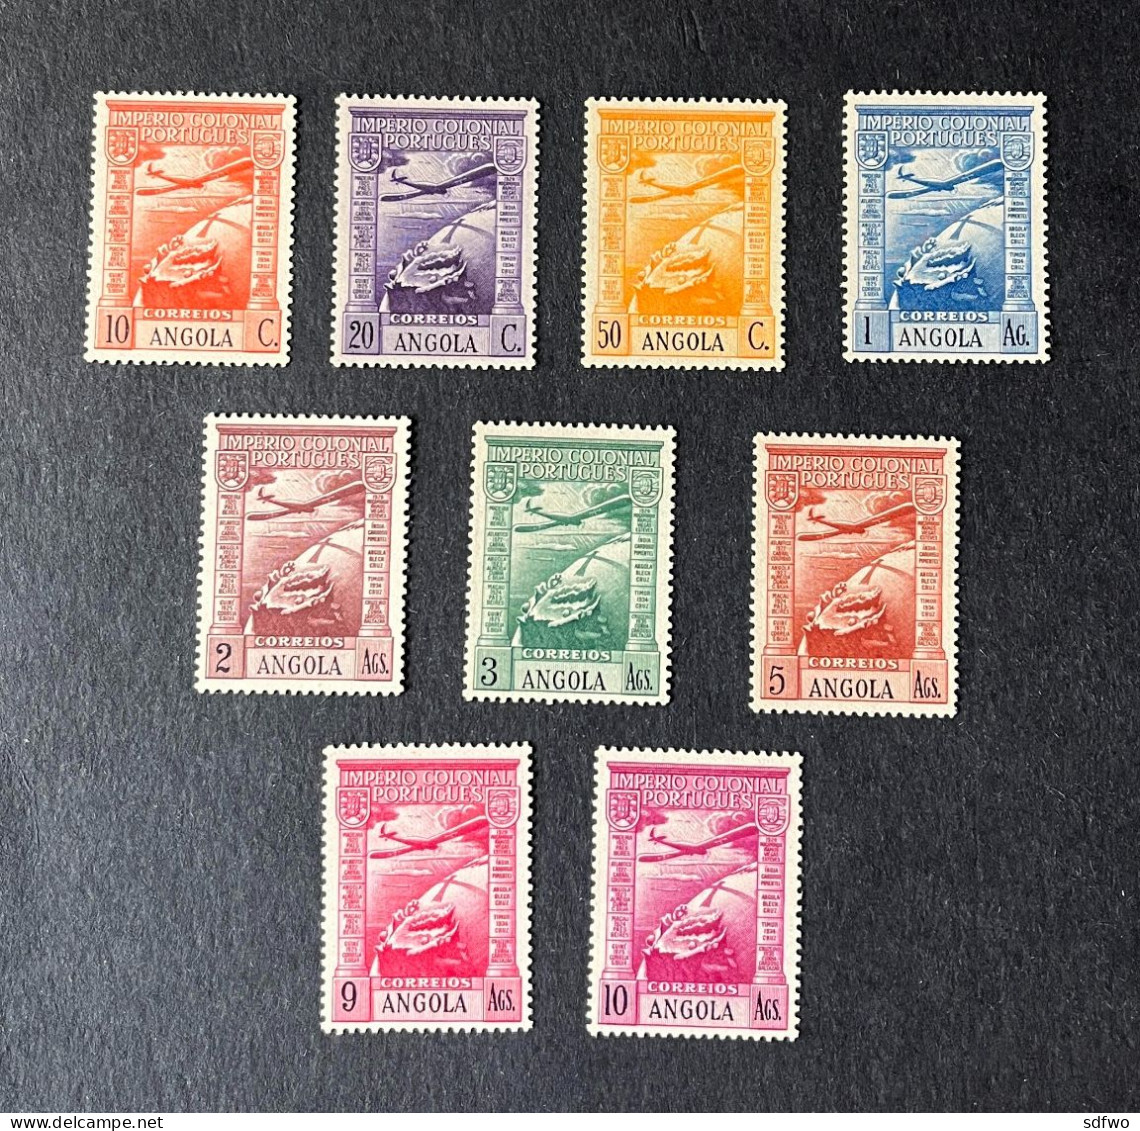 (T2) Angola 1938 Empire Issue Airmail Complete Set - MNH - Angola